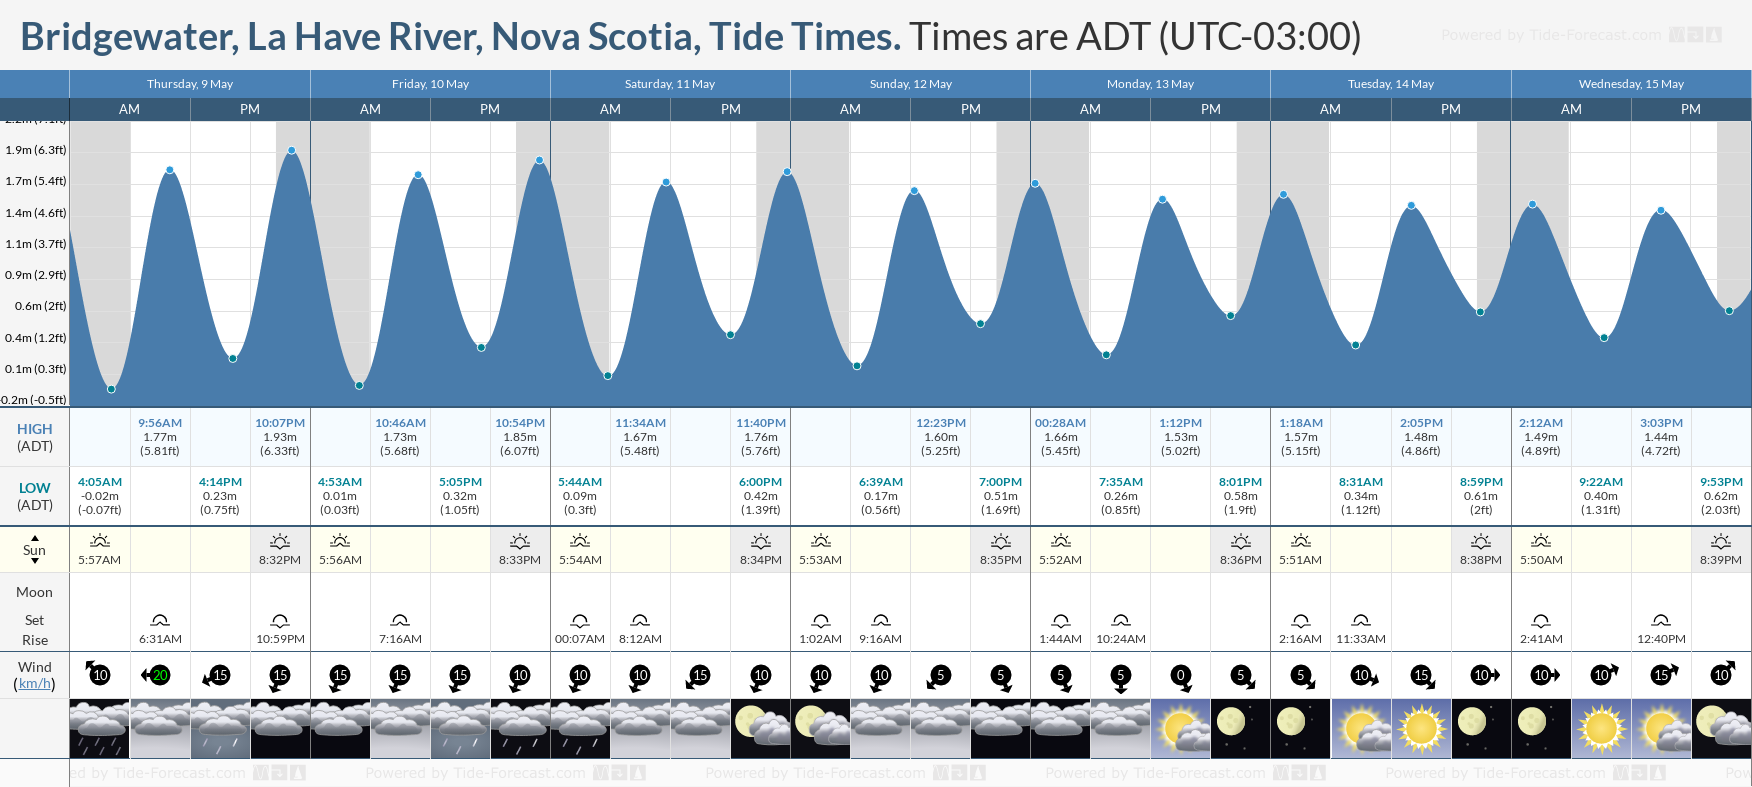 Bridgewater, La Have River, Nova Scotia Tide Chart including high and low tide tide times for the next 7 days